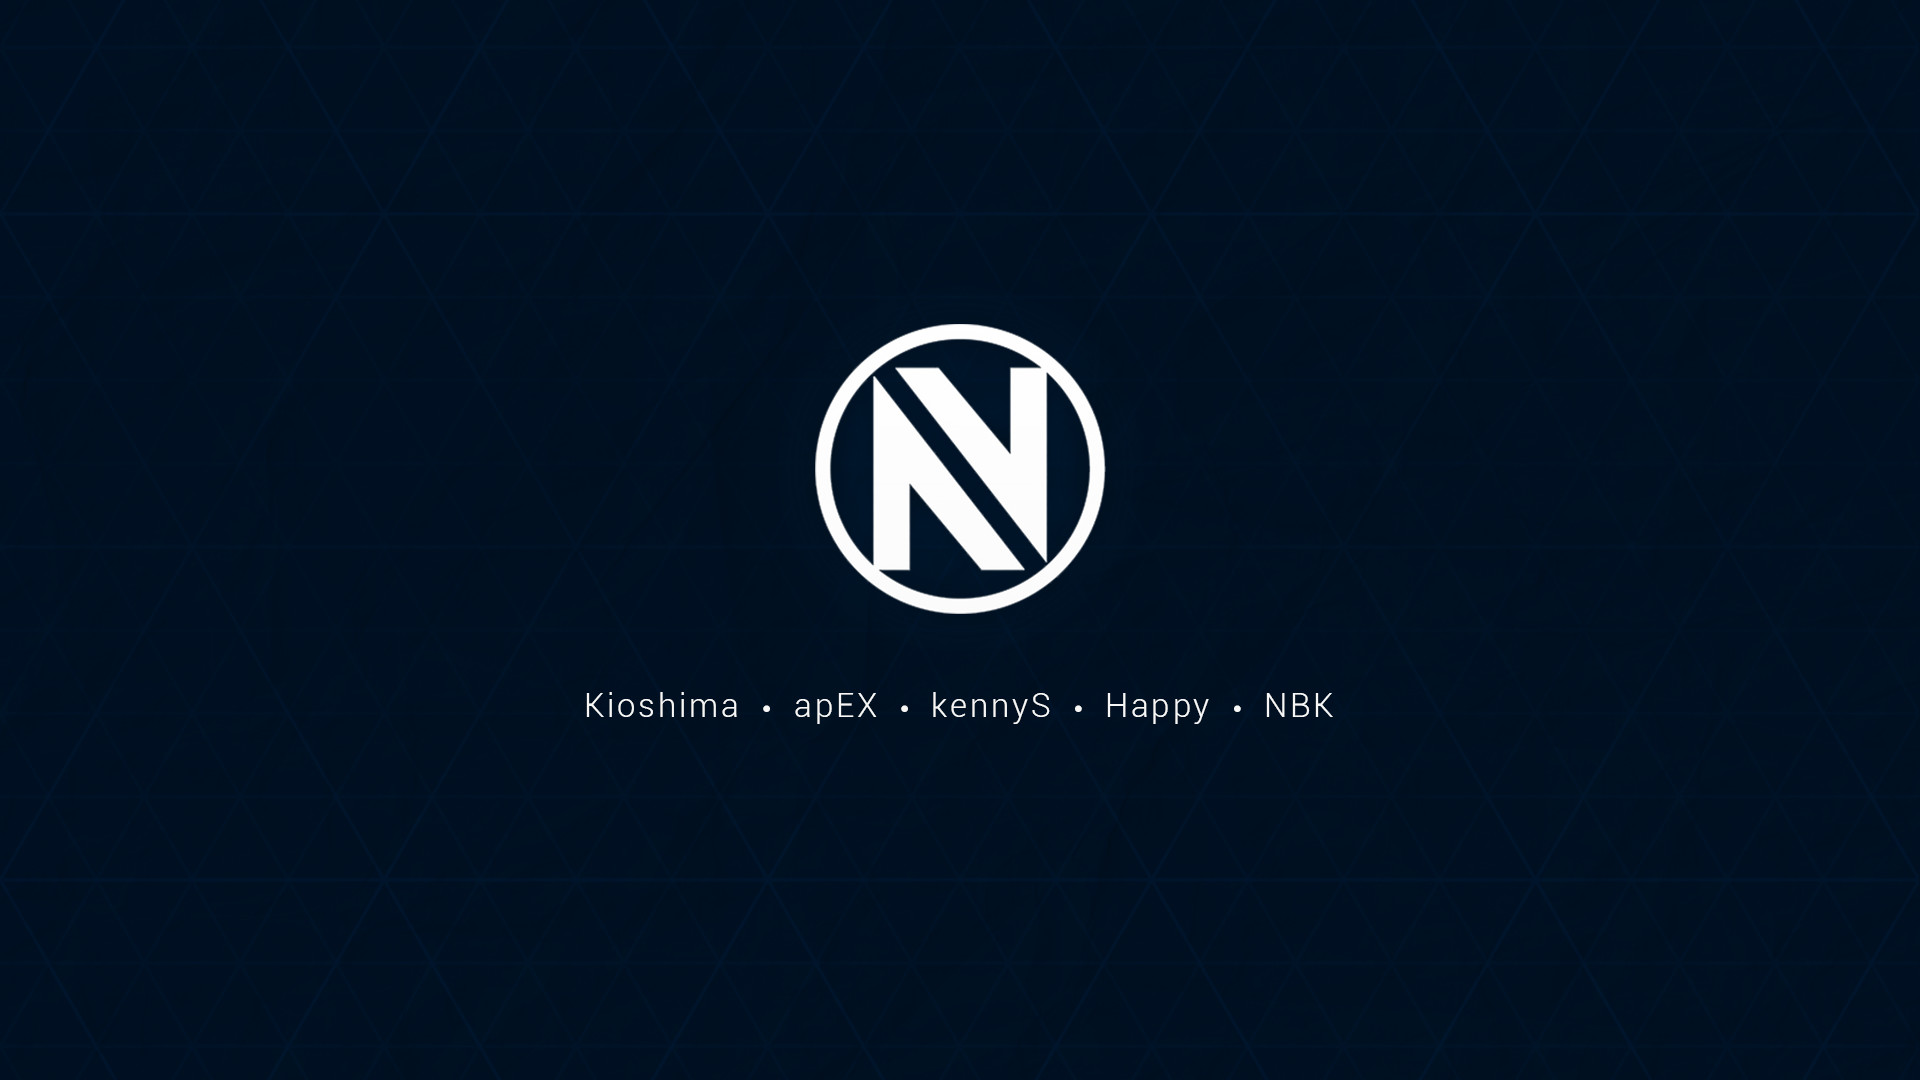 1920x1080 Made a Team EnVyUs wallpaper I hope you like it () Need #iPhone